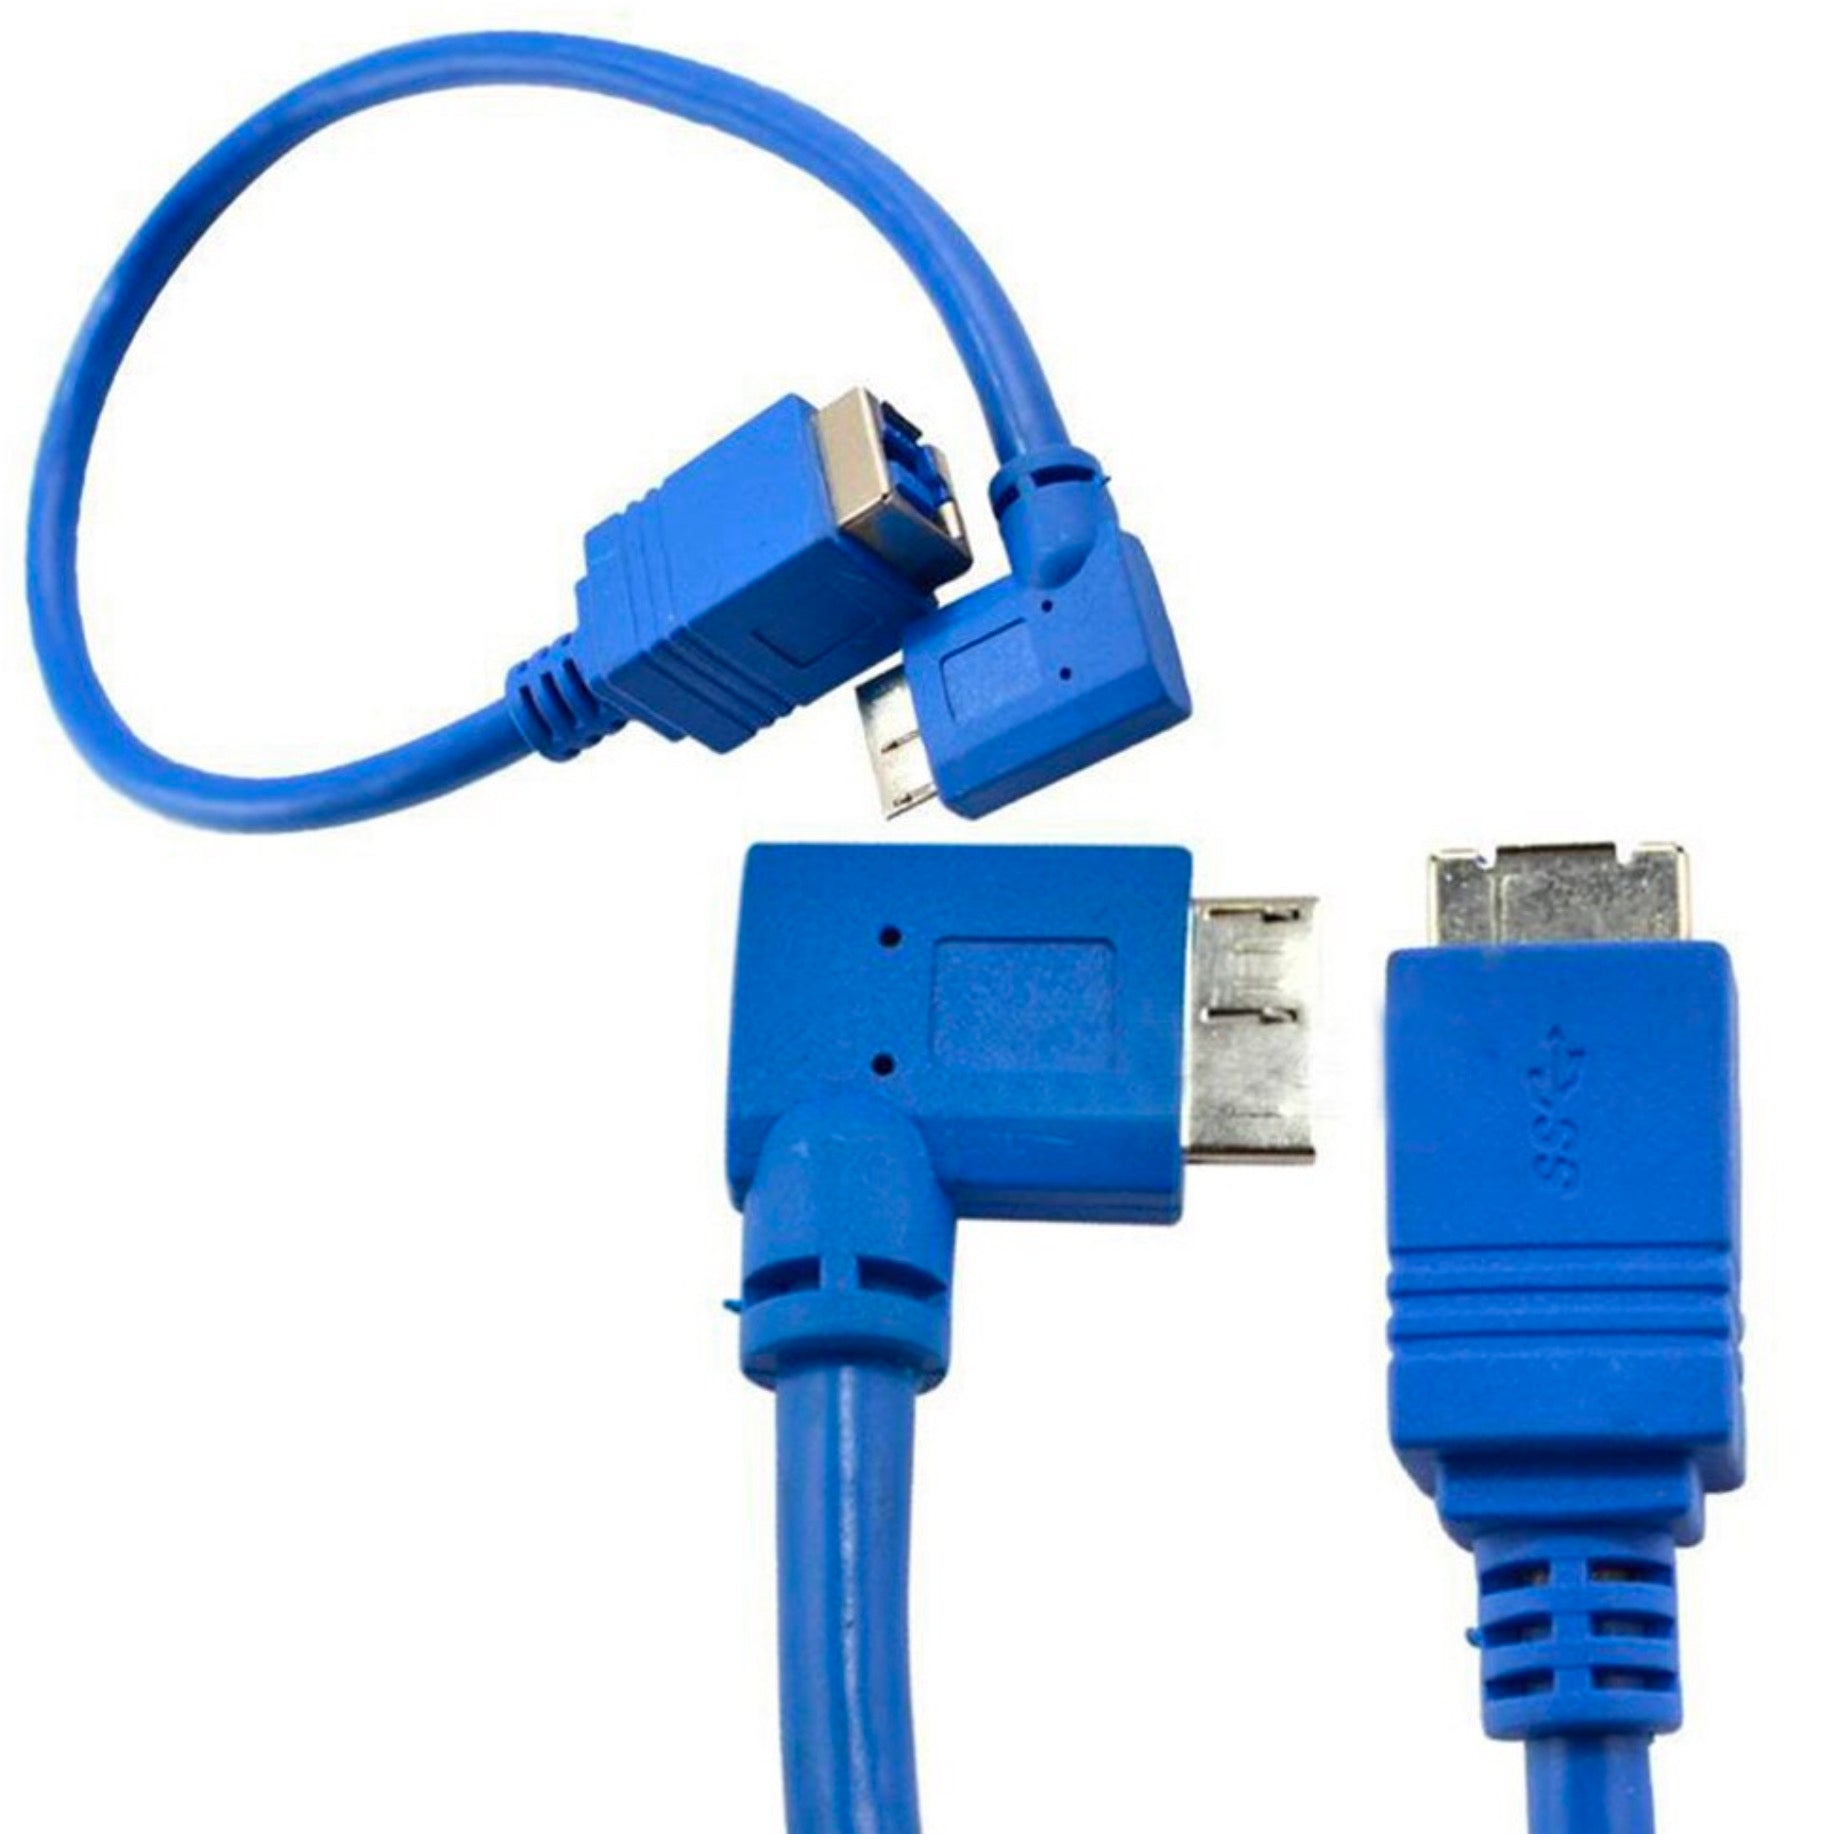 USB 3.0 Type B Female to Micro B Male 10pin Cable 0.3m